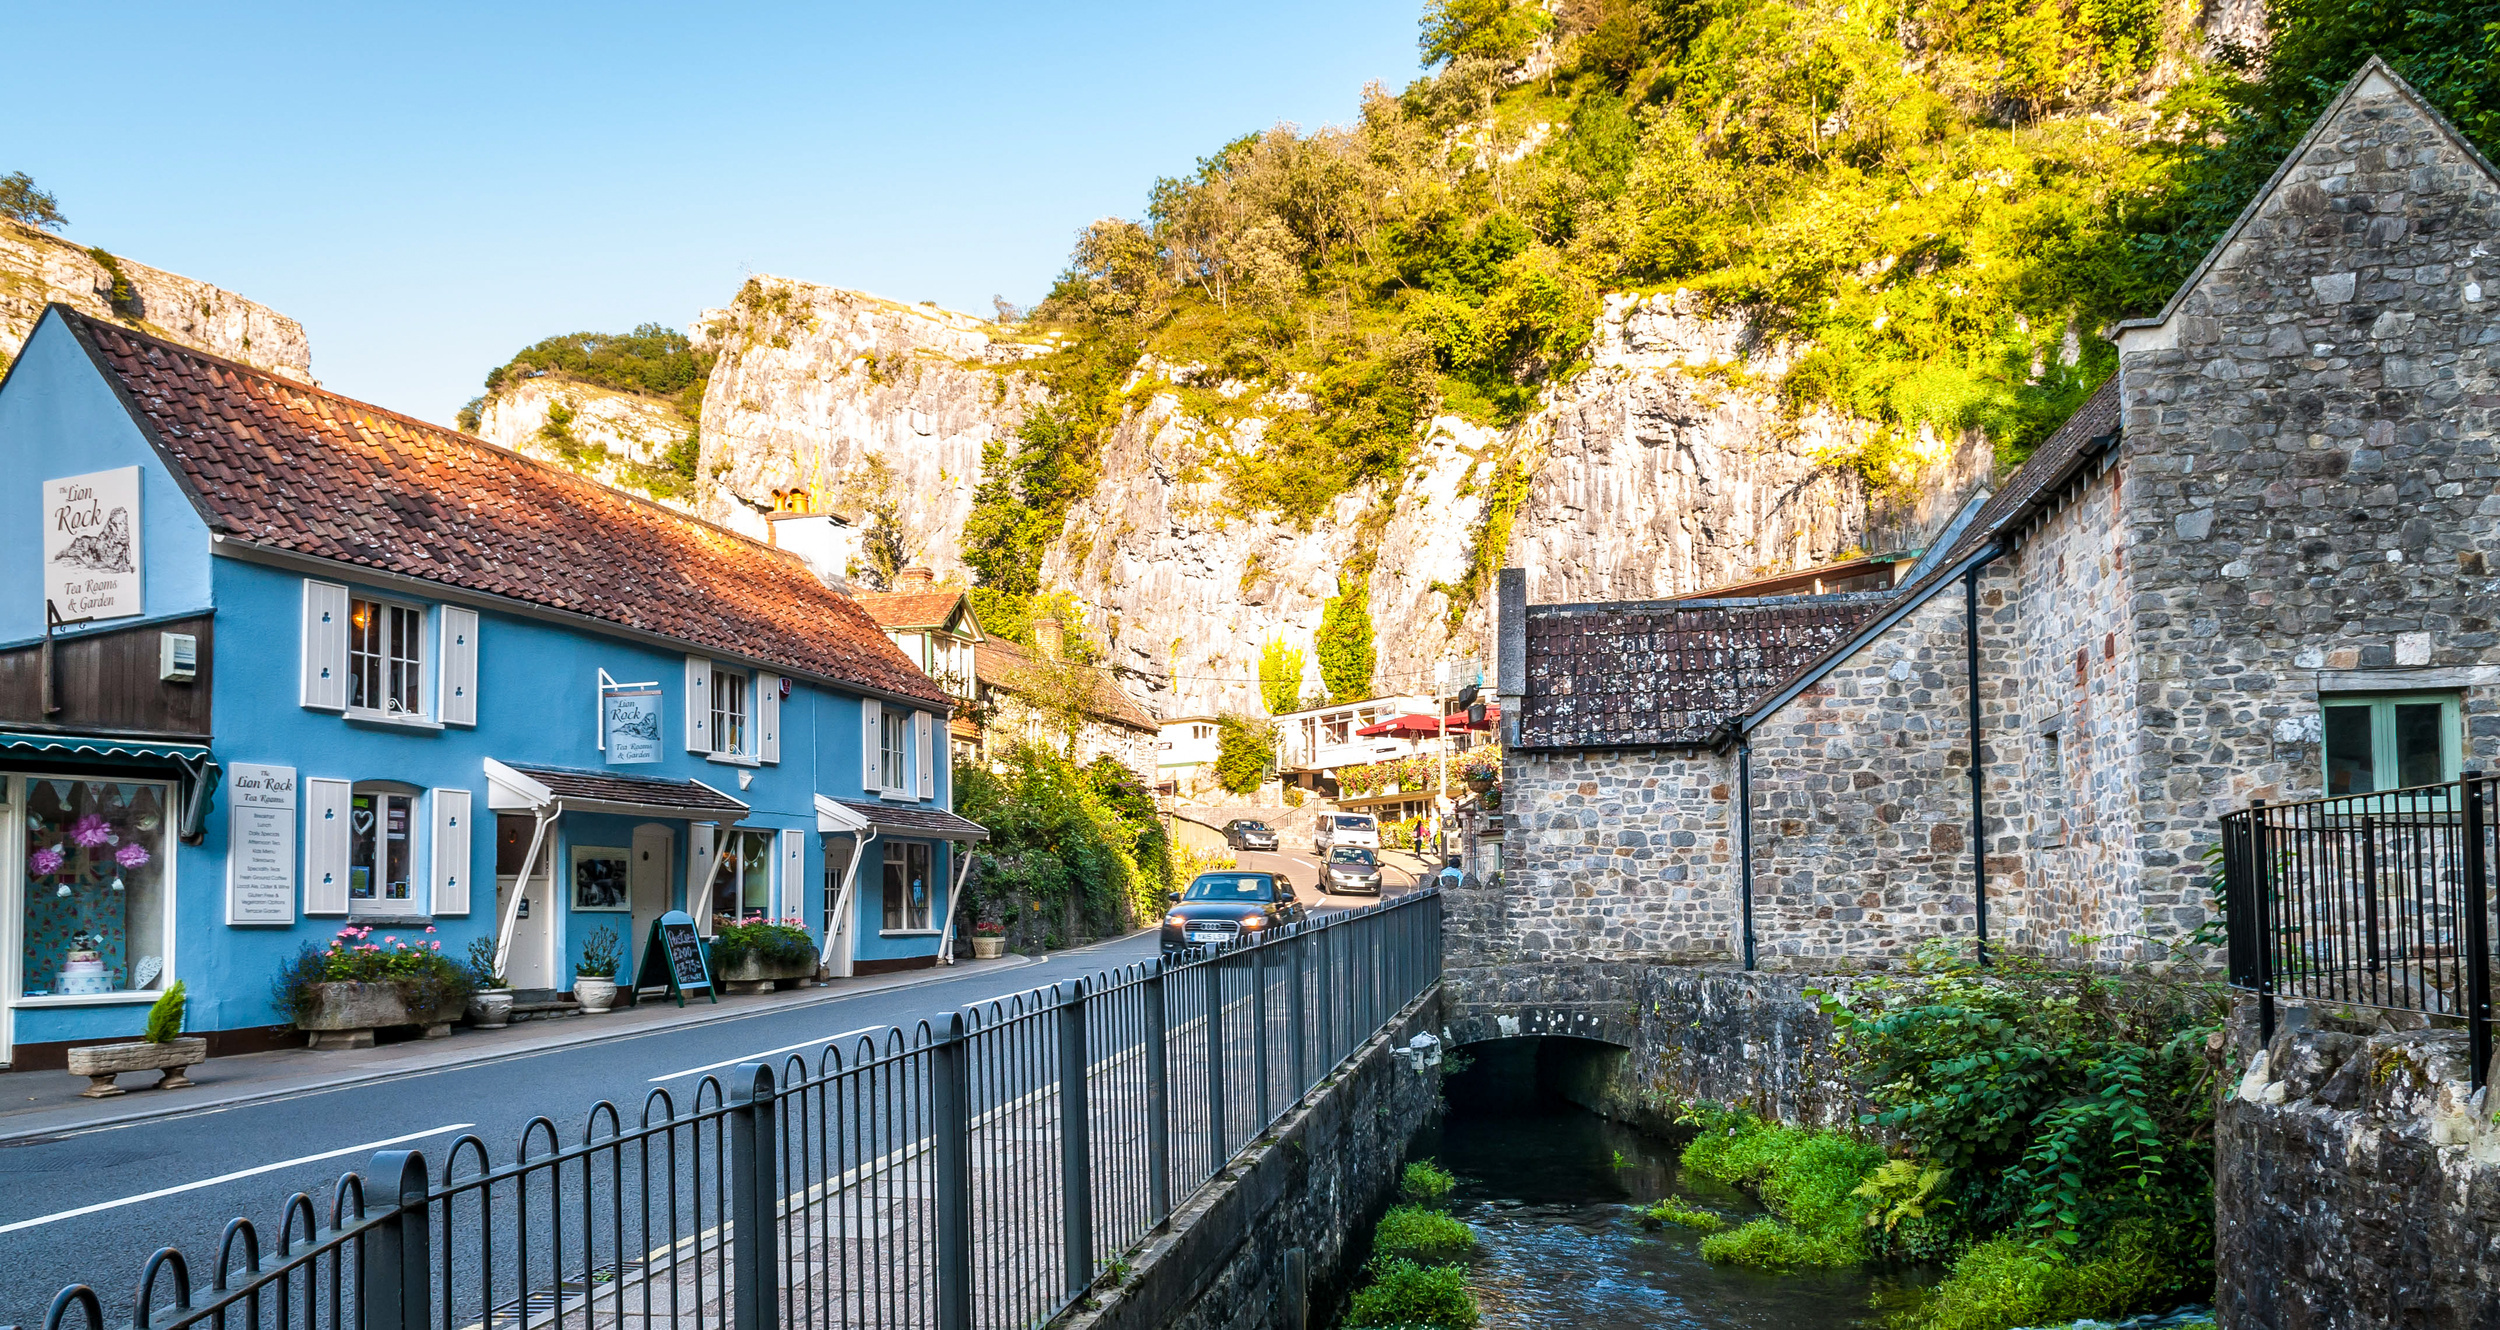 <p>Americans might love cheddar, but we can’t take credit for it. The Brits have been producing this popular cheese since the 15th century when it was first created in the village of Cheddar. Located not far from Bath, it’s a great addition to any trip to the area.</p><p><a href='https://www.msn.com/en-us/community/channel/vid-cj9pqbr0vn9in2b6ddcd8sfgpfq6x6utp44fssrv6mc2gtybw0us'>Follow us on MSN to see more of our exclusive lifestyle content.</a></p>